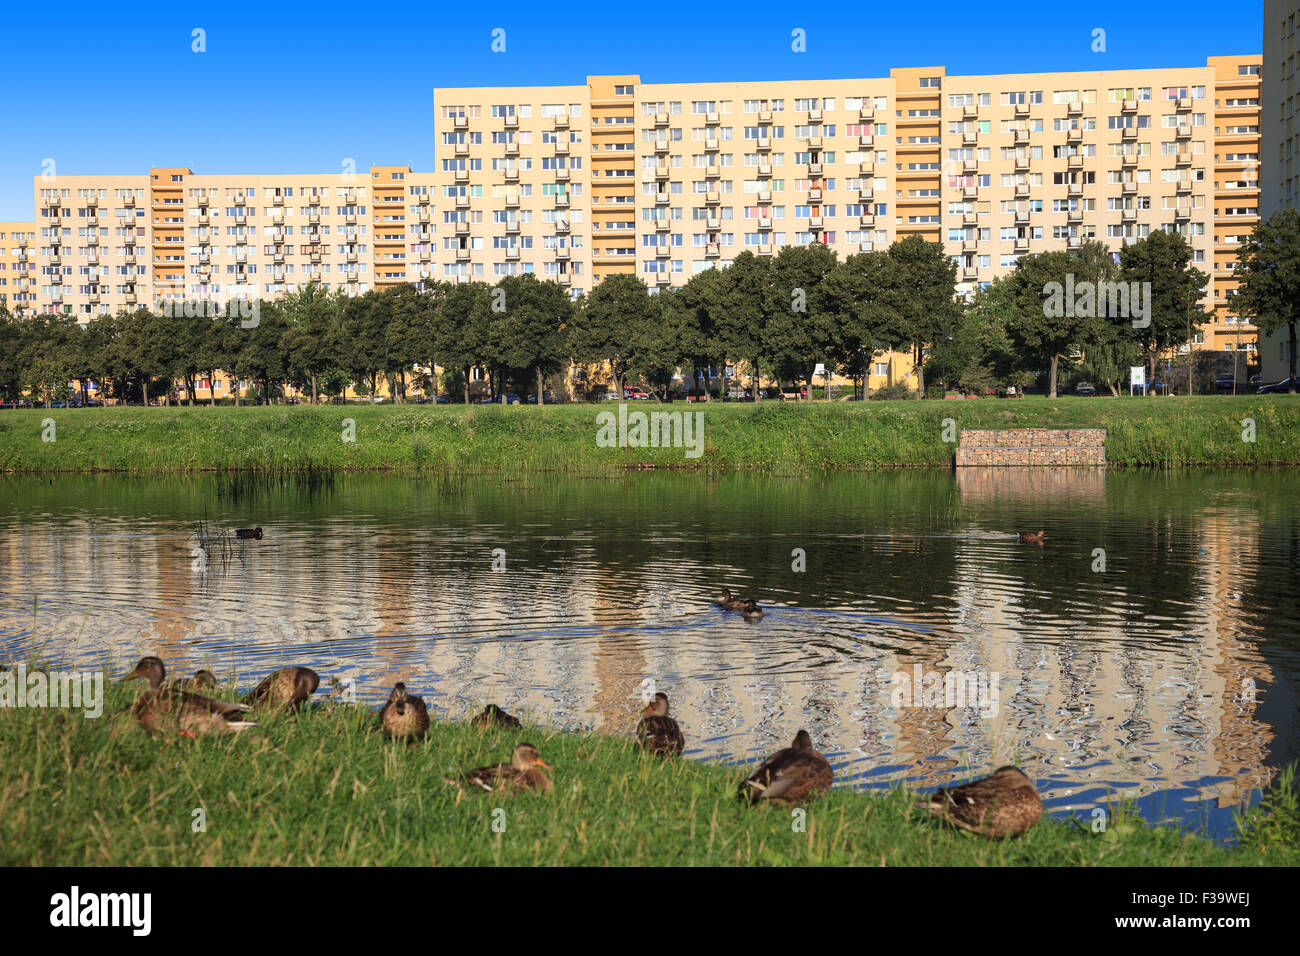 Multi-story buildings - Typical socialist block in East Europe. Stock Photo